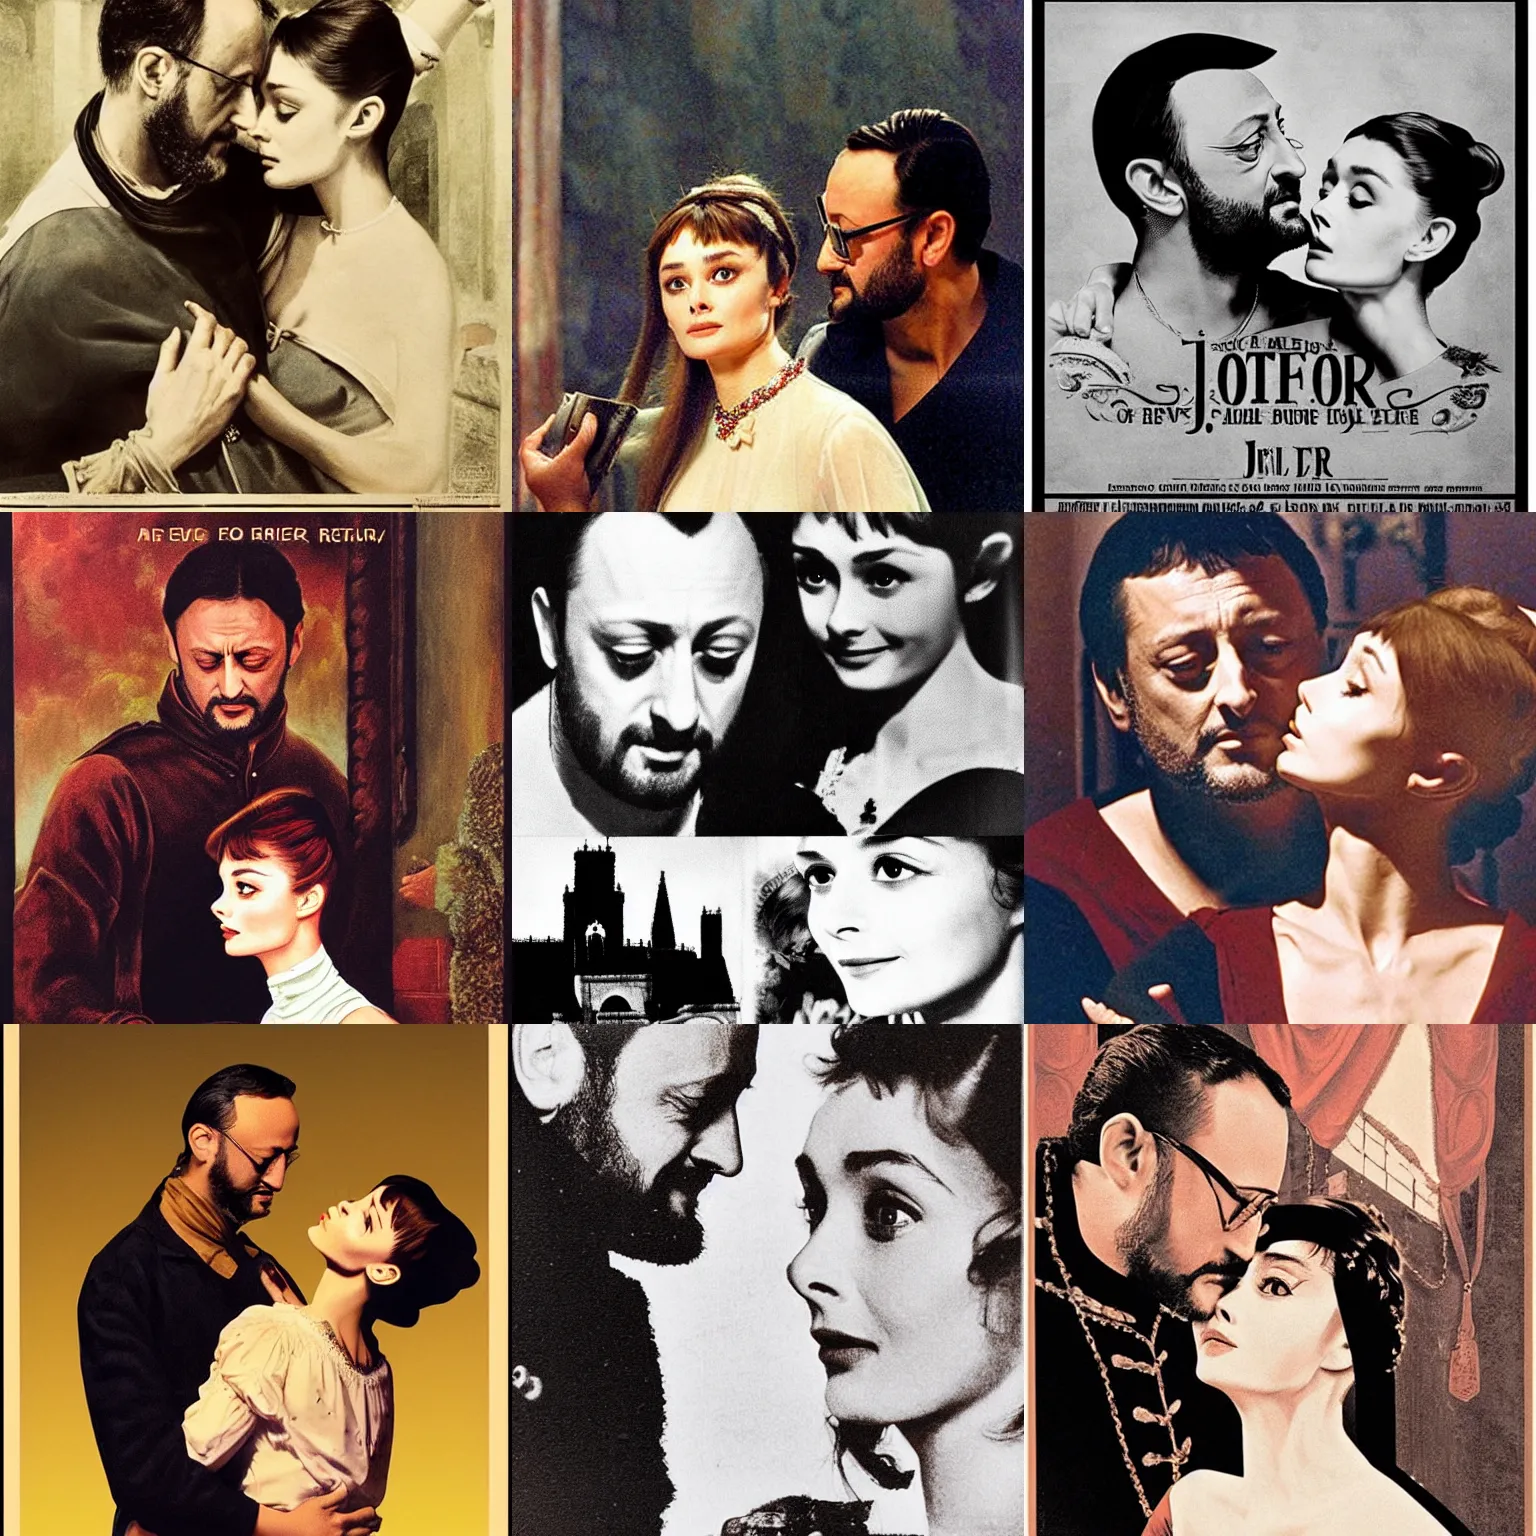 Prompt: Historical Romeo (Jean Reno) and Juliet (Audrey Hepburn), are looking at each other romantically. romantic, tragic, restrained, lumnious, 19th theater poster by rank Dicksee, Alfred Elmore, Mather Brown